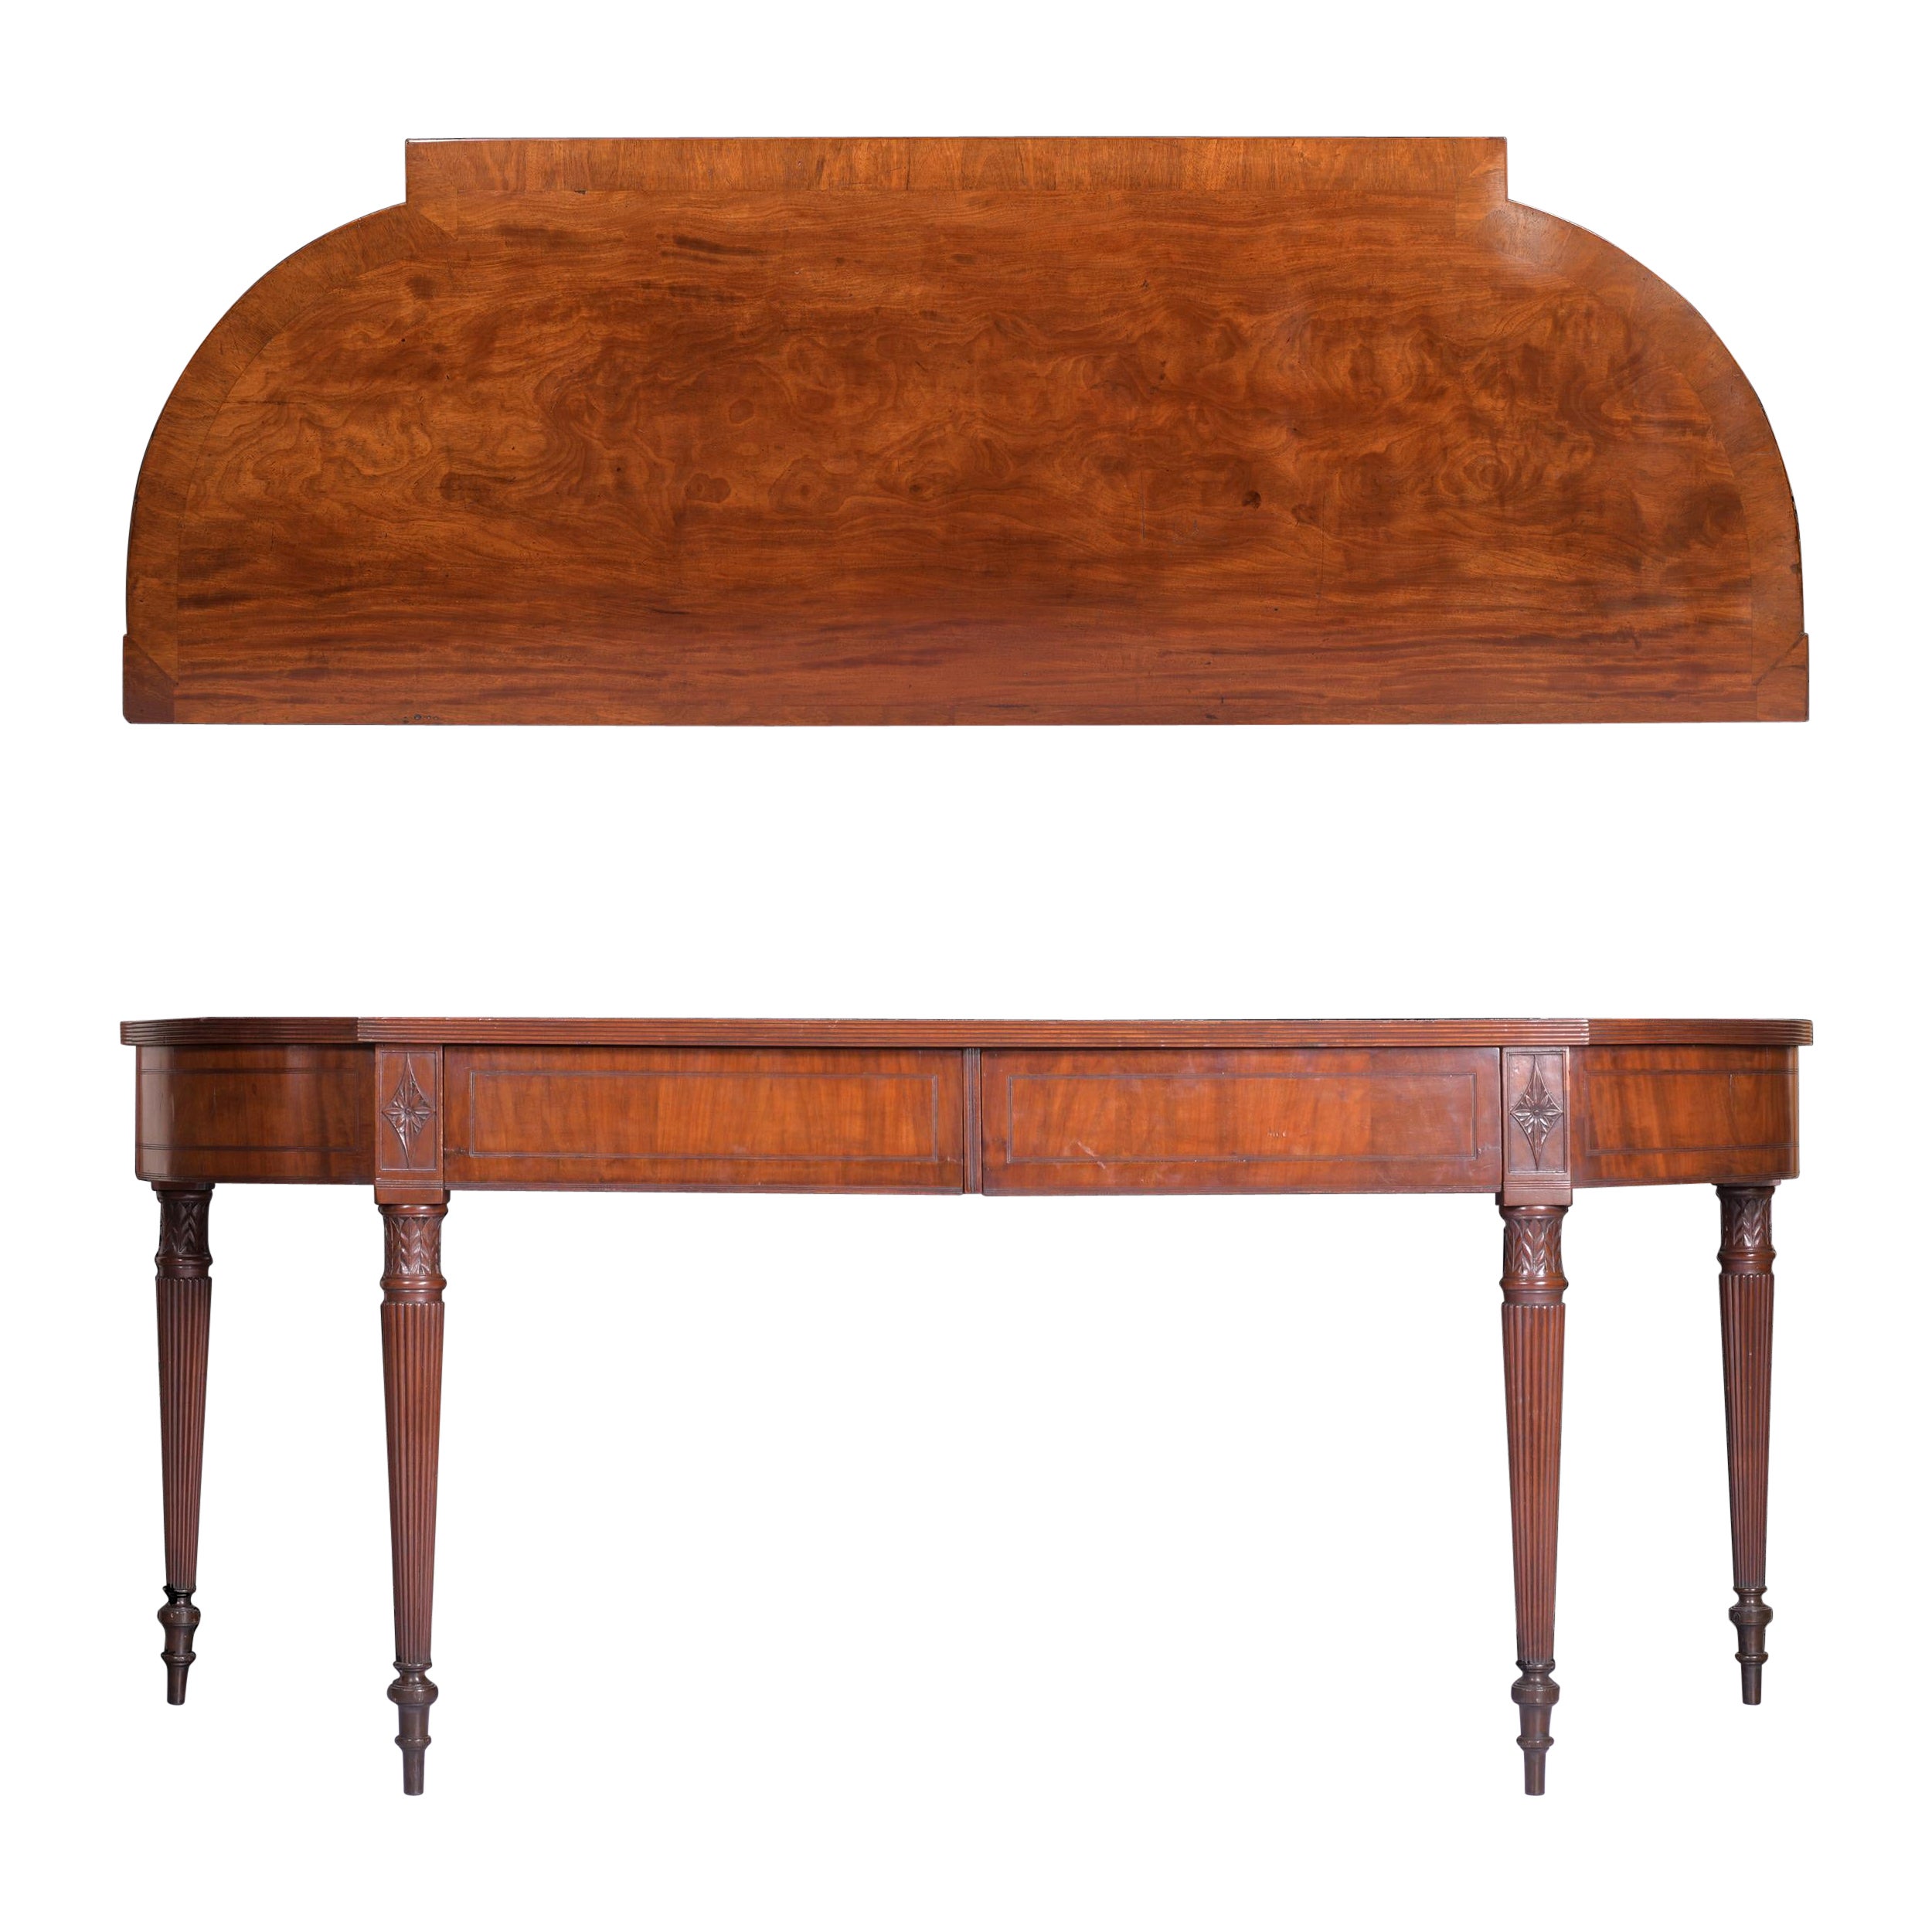 19th Century English Regency Serving / Console Table Attributed to Gillows